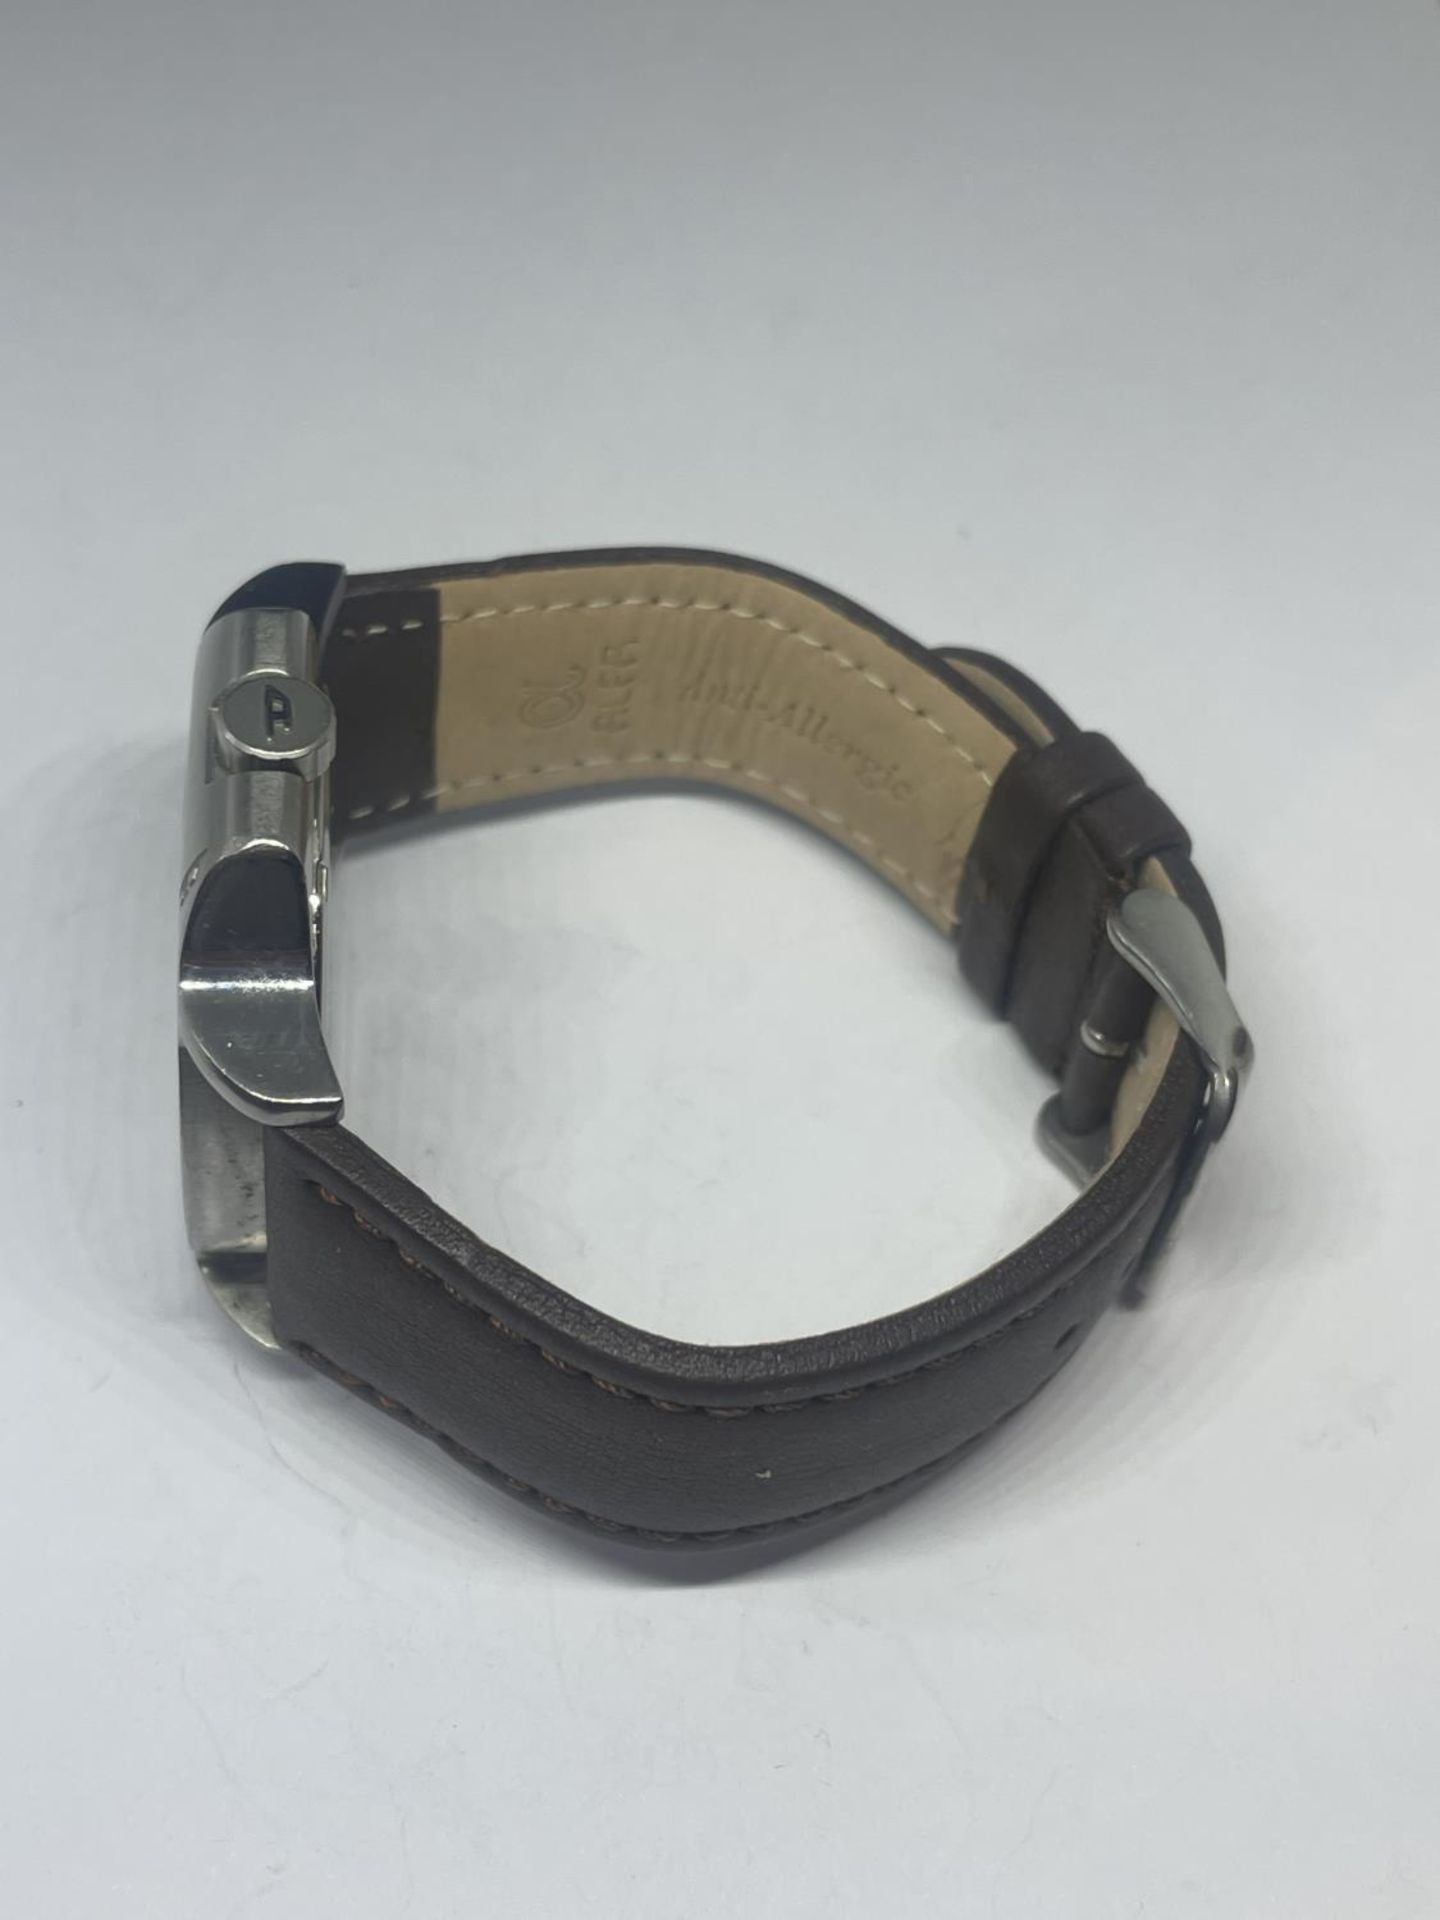 A DIESEL DAY AND DATE WRIST WATCH SEEN WORKING BUT NO WARRANTY - Image 2 of 3